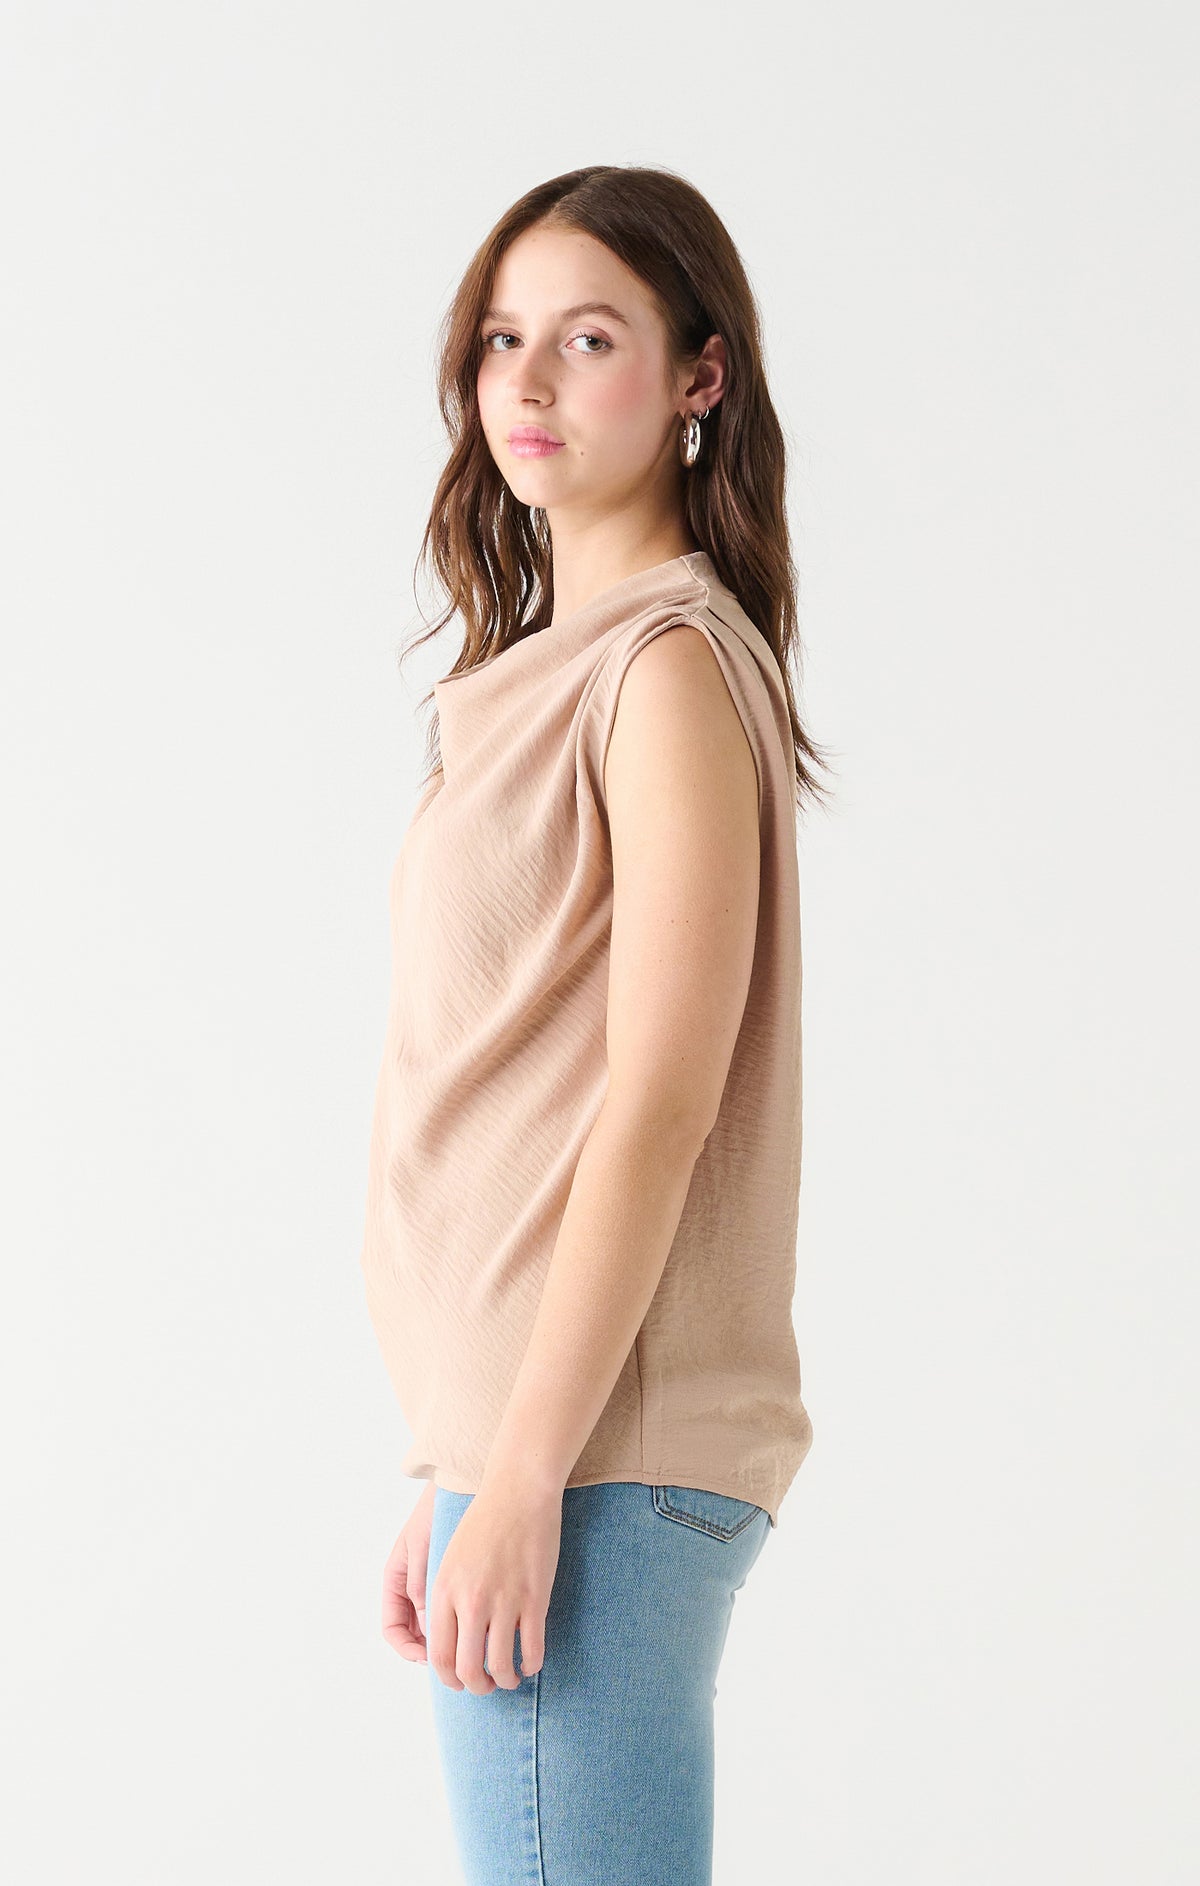 Black Tape Top 2323504T-TAUPE